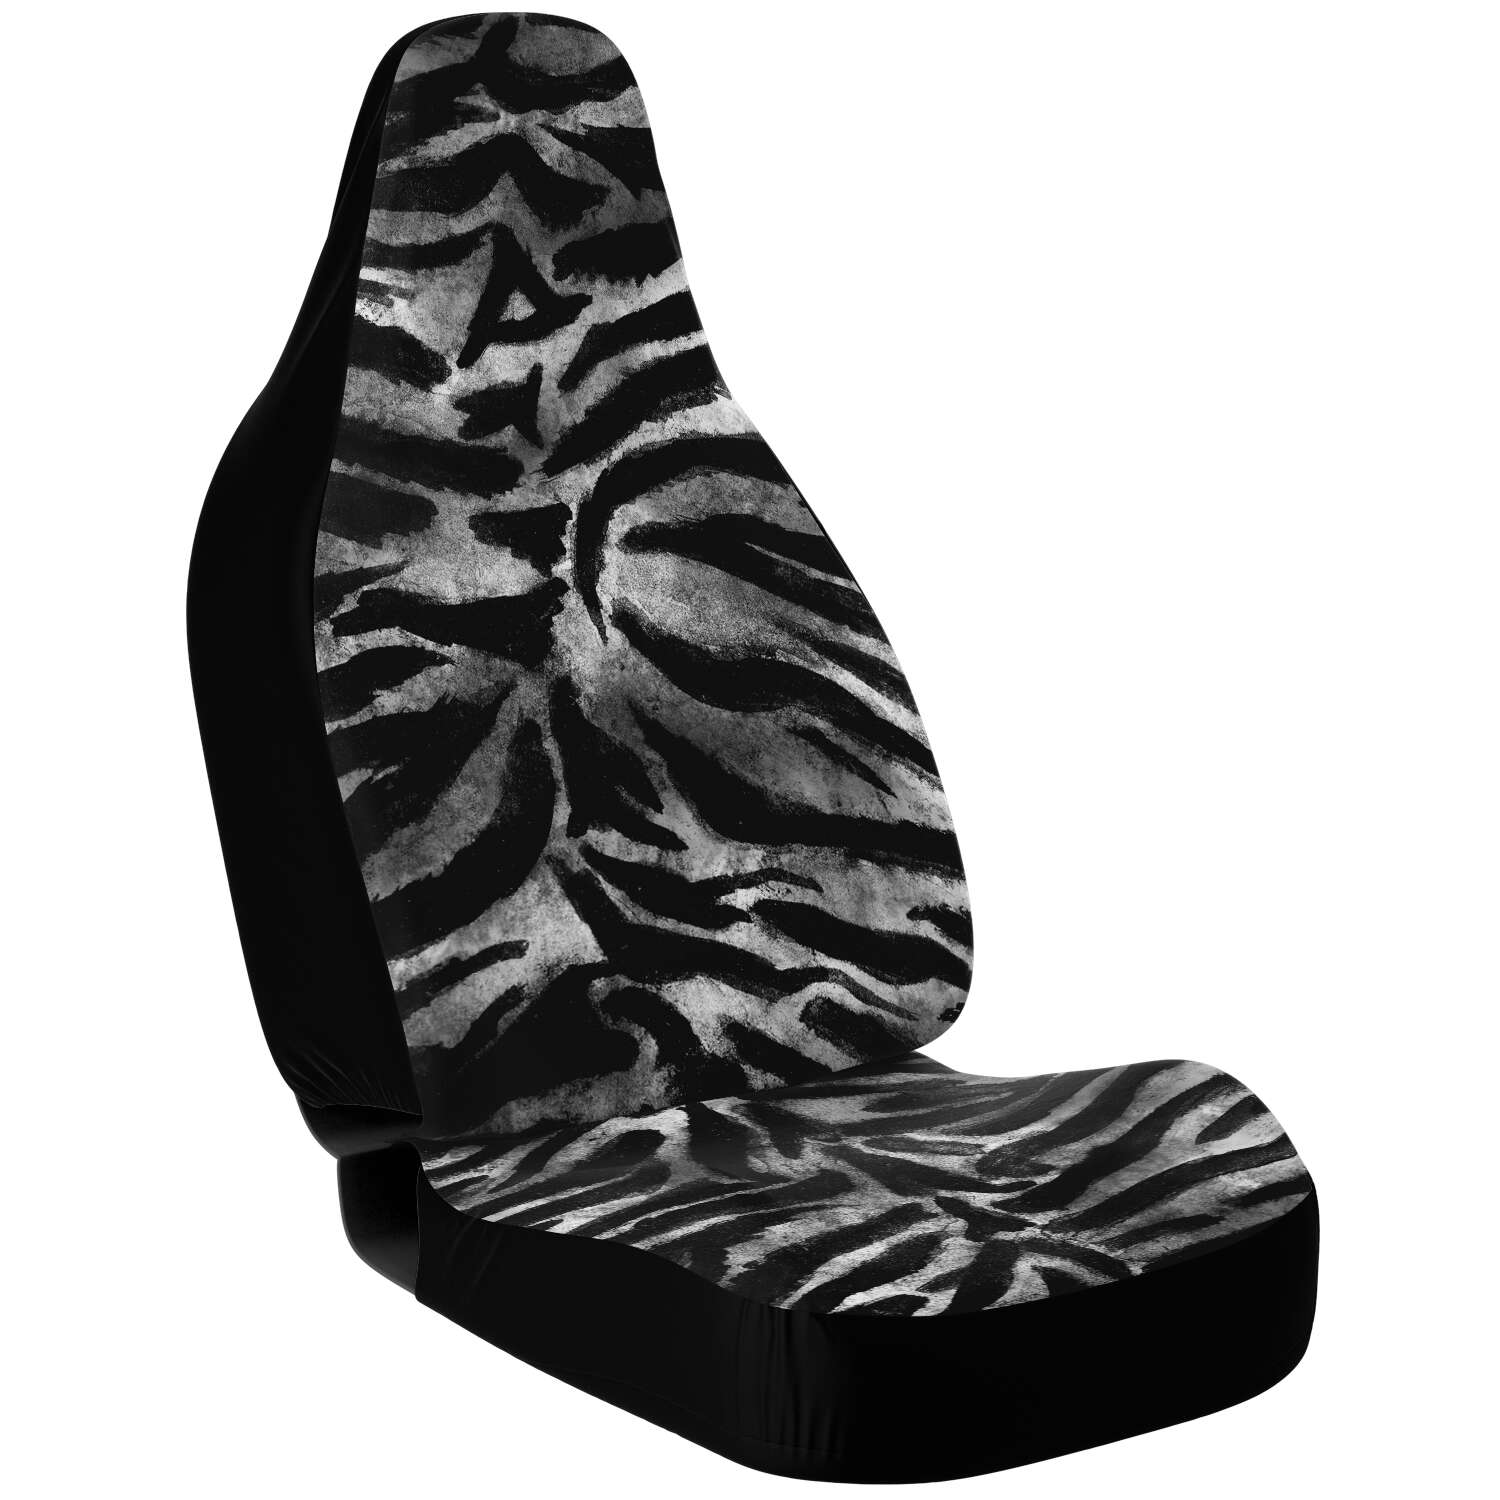 Tiger Car Seat Cover, Grey Tiger Stripe Bestselling Animal Print Essential Premium Quality Best Machine Washable Microfiber Luxury Car Seat Cover - 2 Pack For Your Car Seat Protection, Cart Seat Protectors, Car Seat Accessories, Pair of 2 Front Seat Covers, Custom Seat Covers